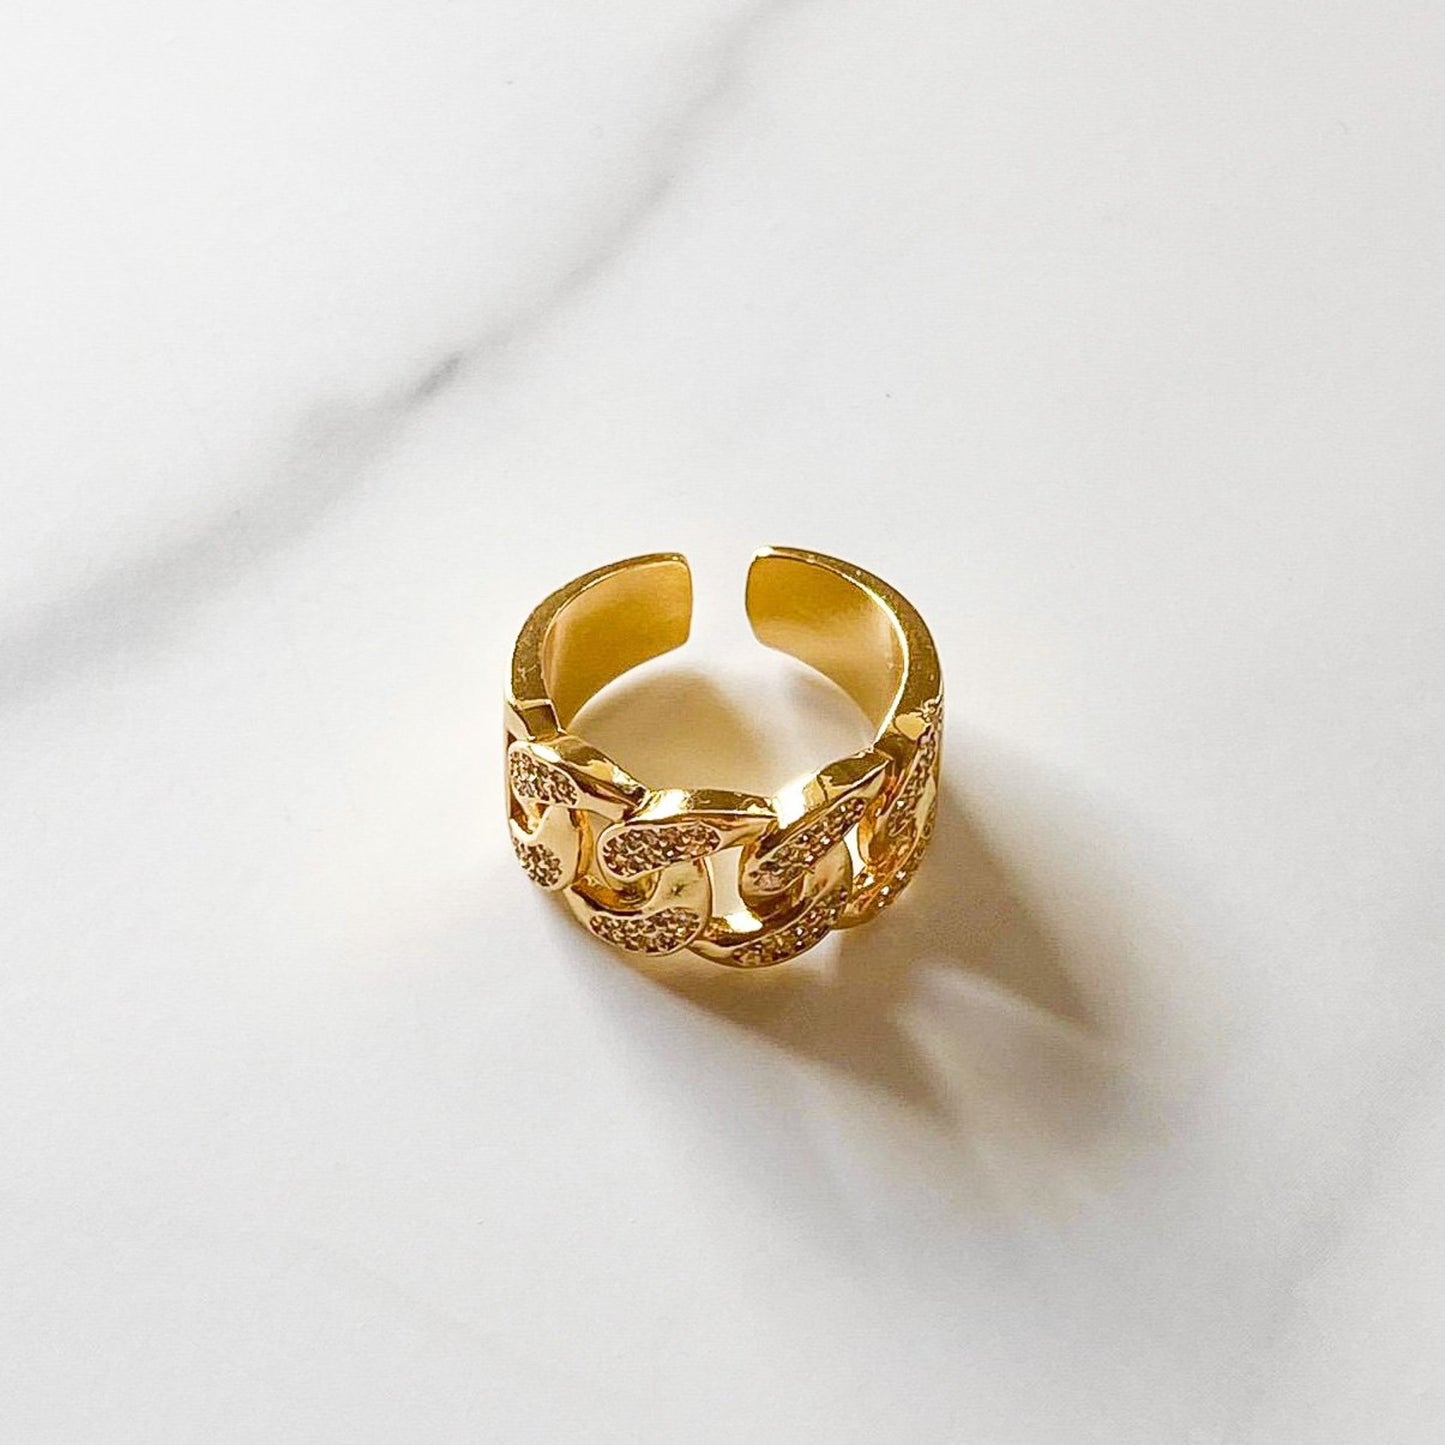 Lucy gold-filled ring, adjustable, water-resistant, made in Brazil. By ISVI Boutique Miami